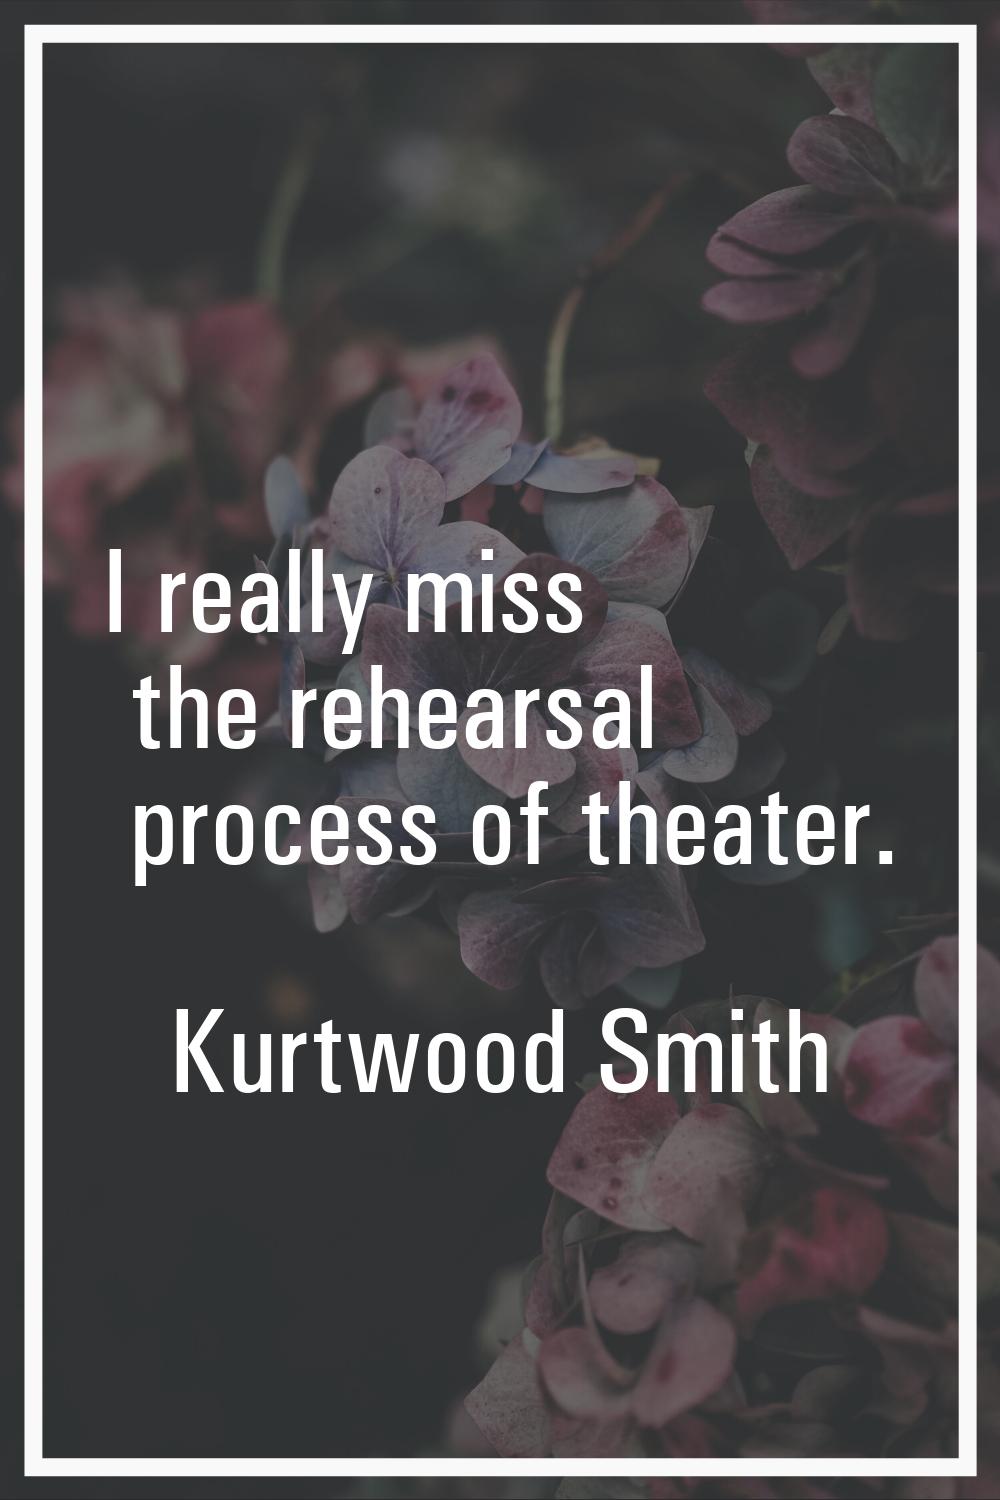 I really miss the rehearsal process of theater.